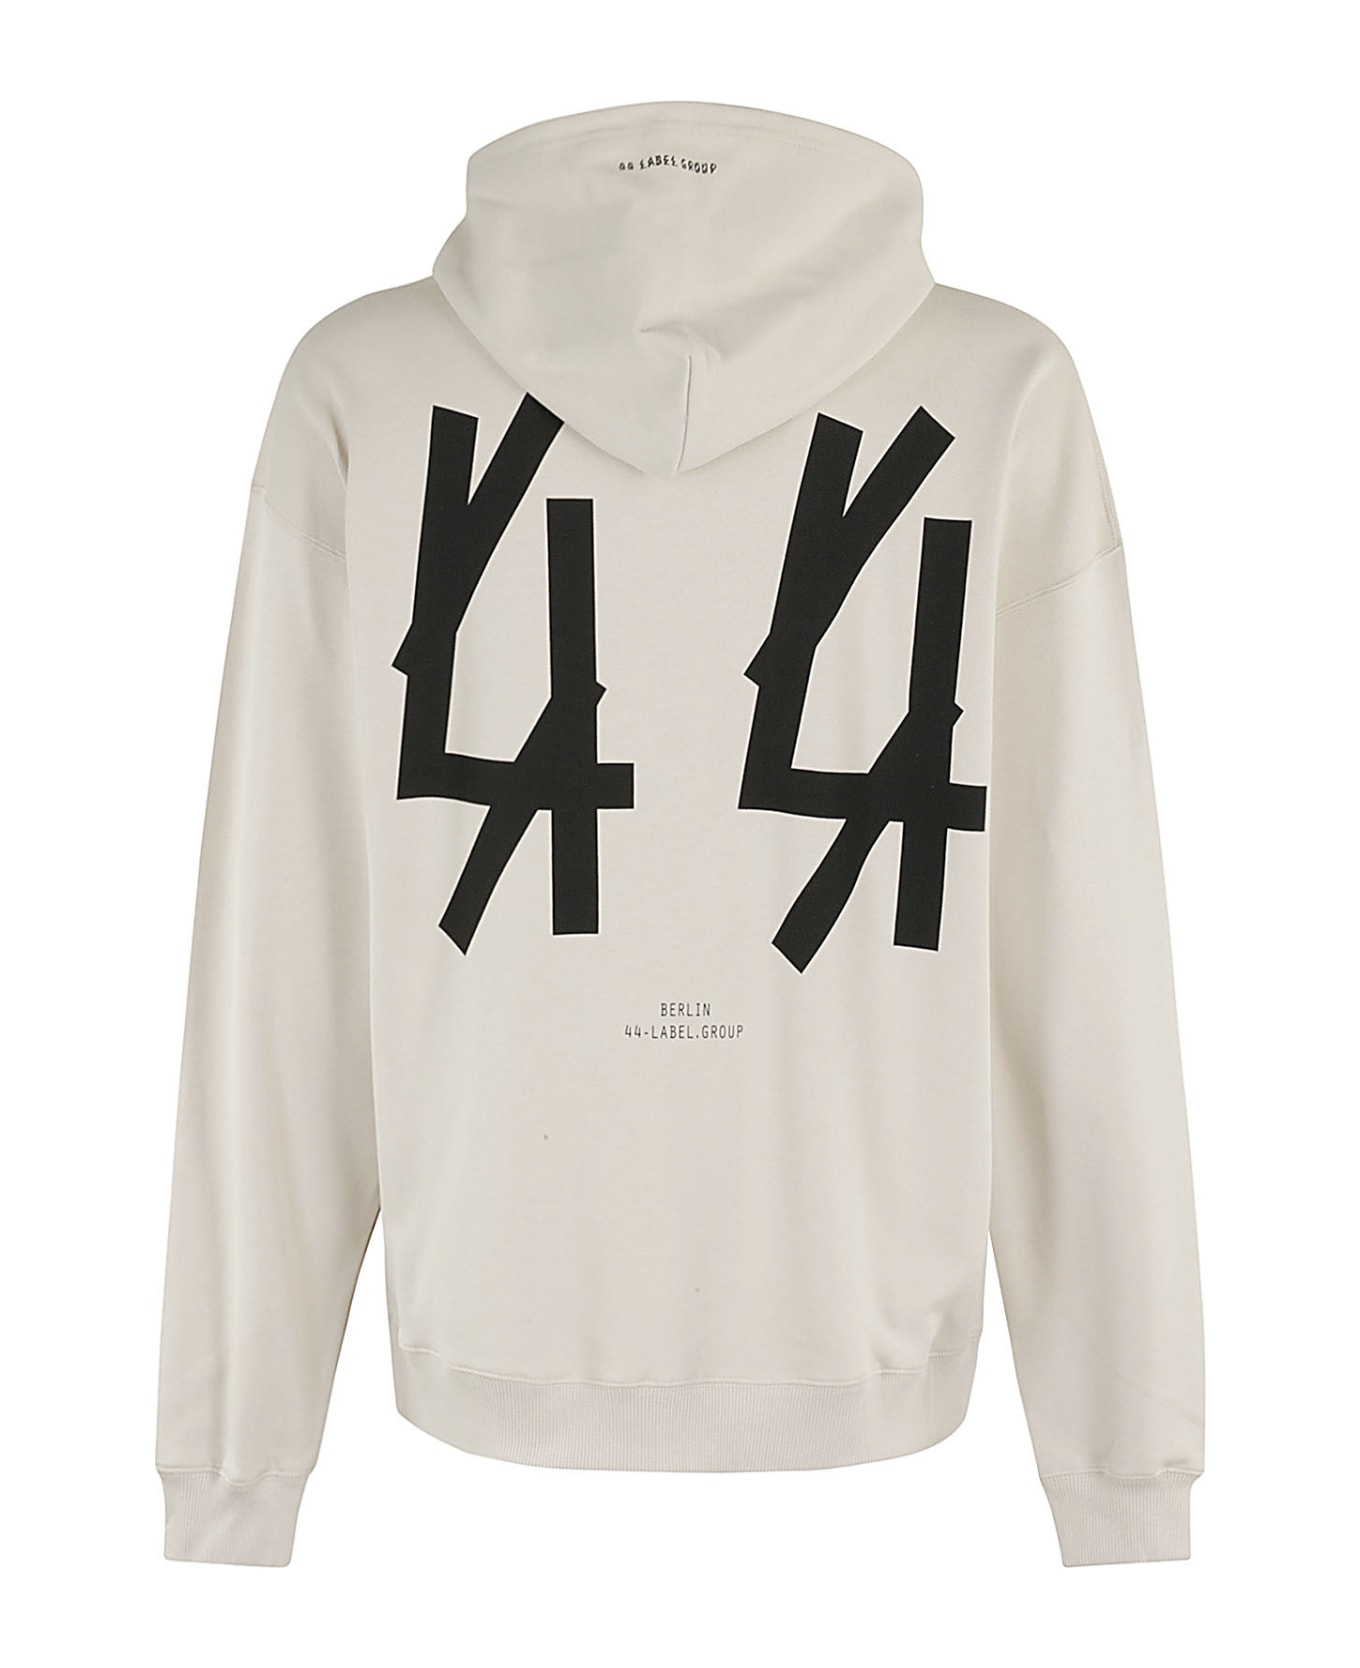 44 Label Group New Classic Hoodie